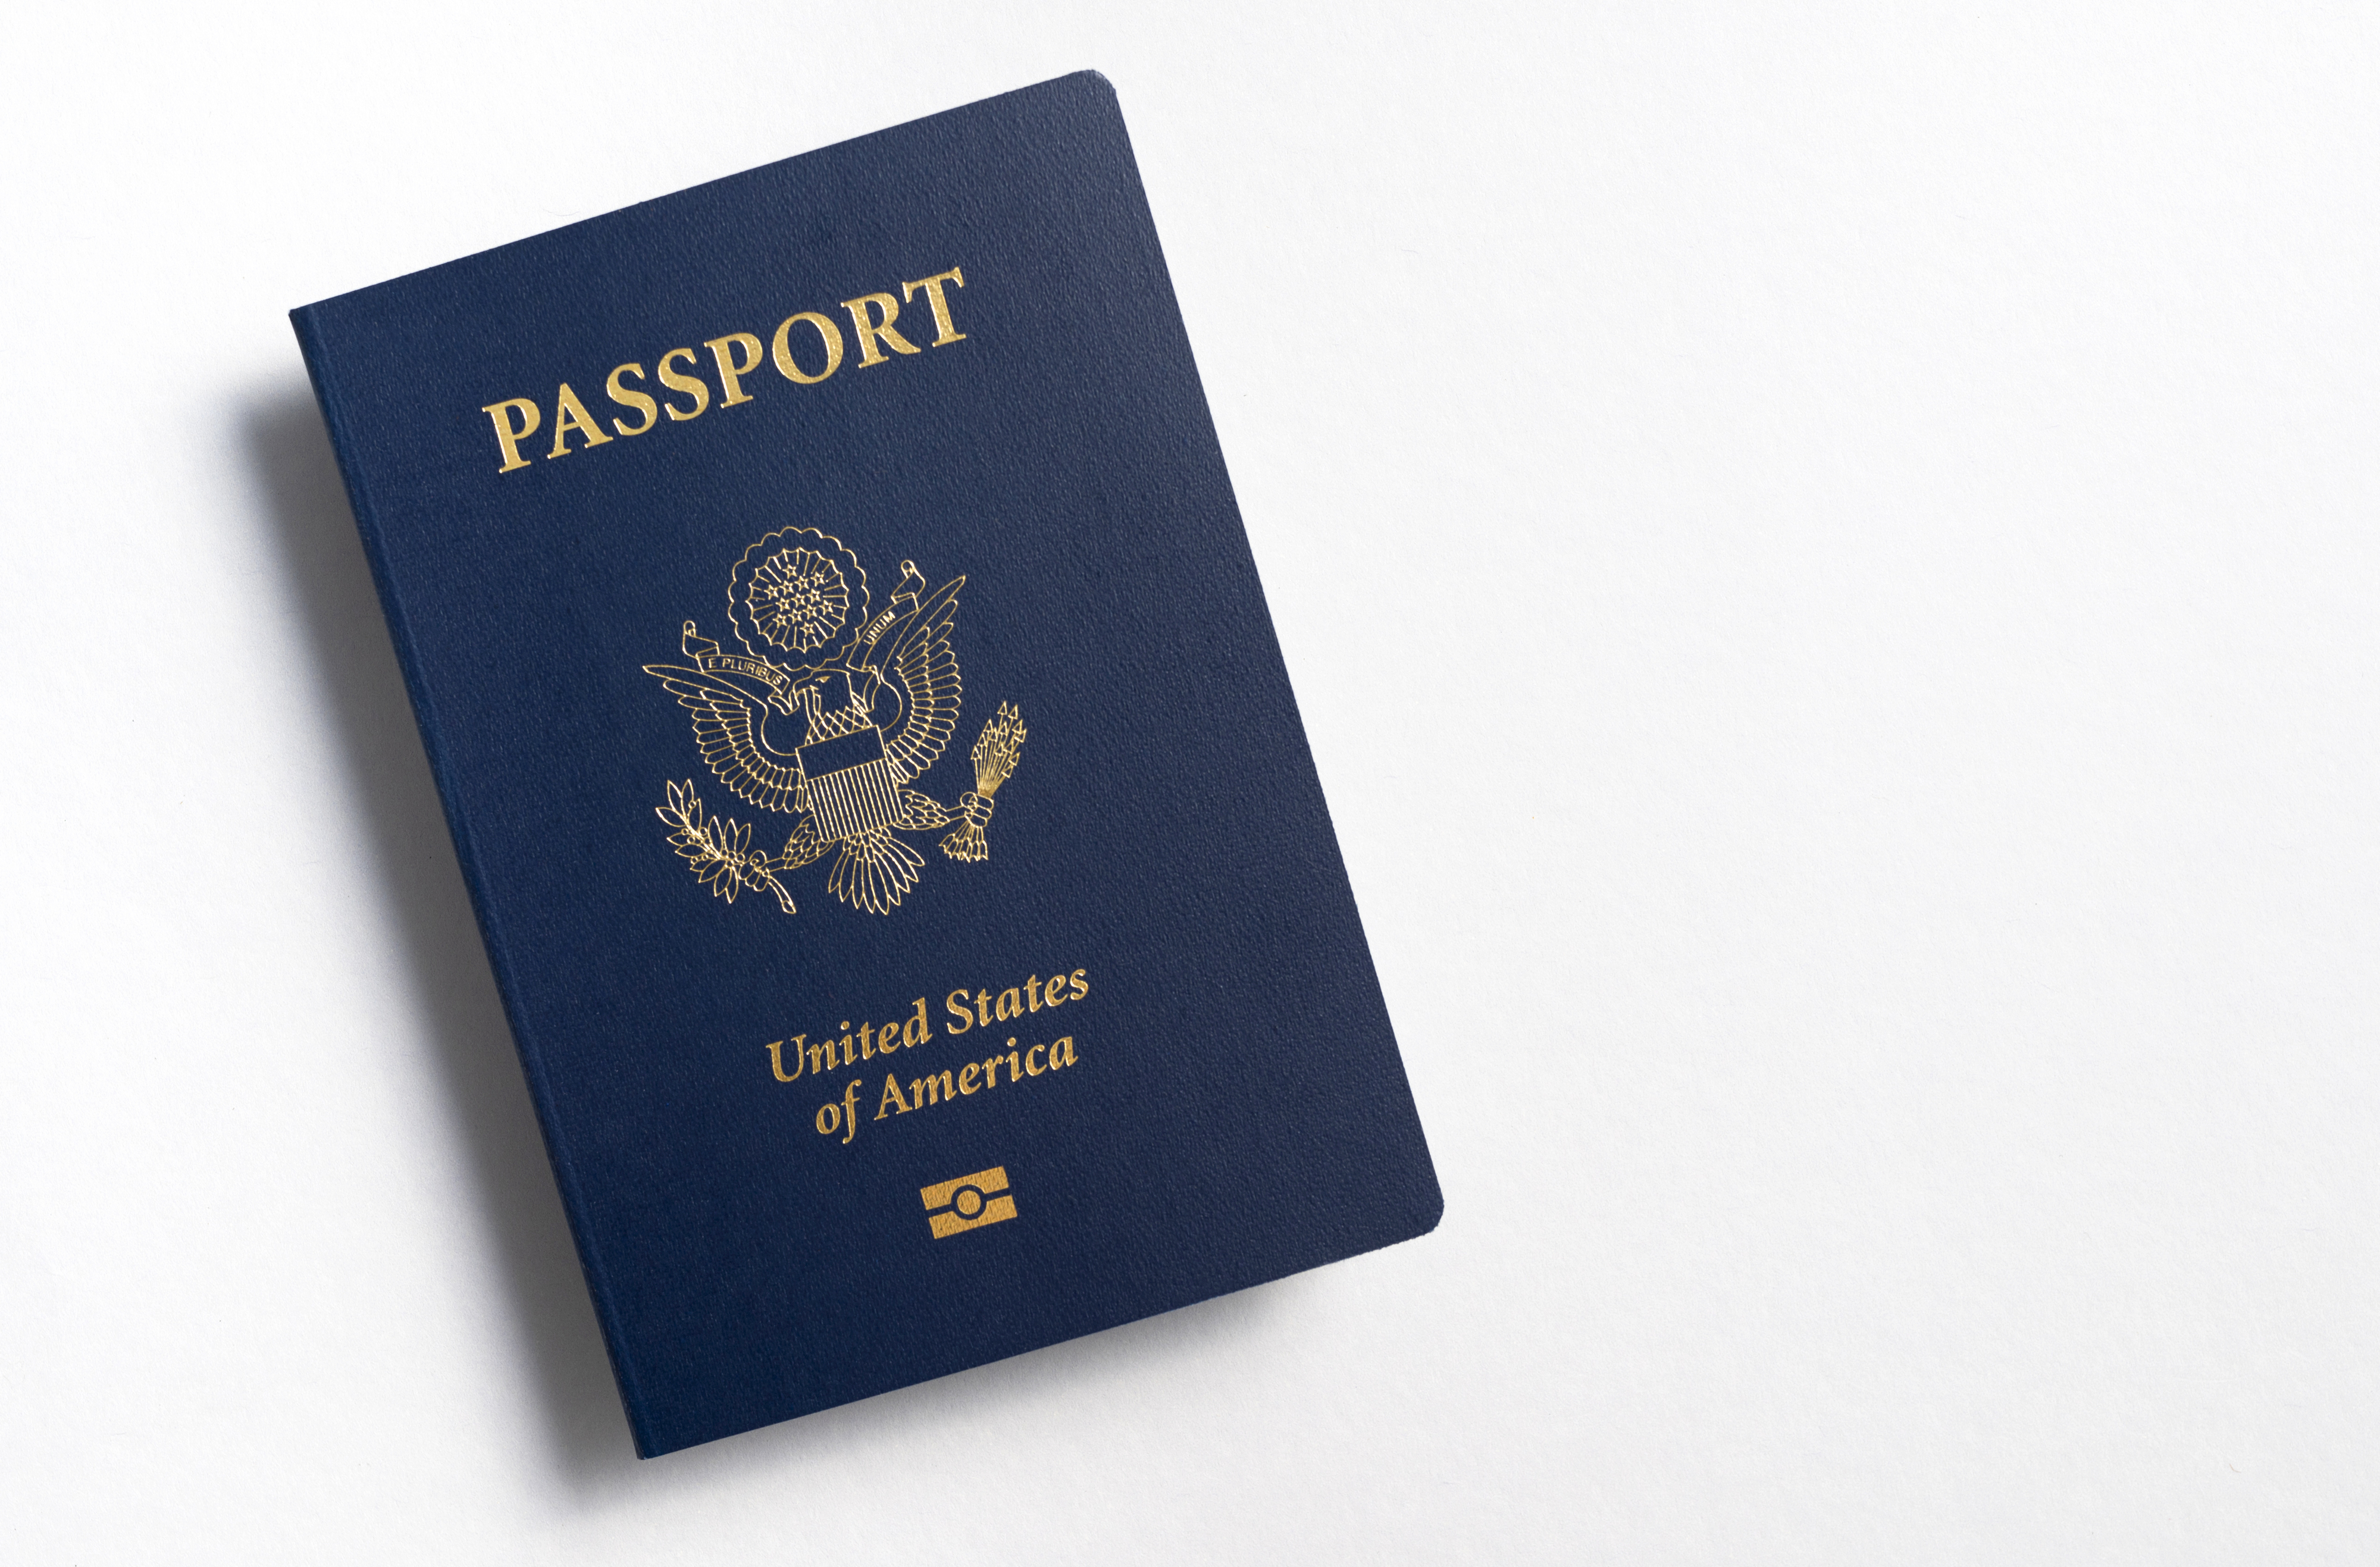 U.S. passport resting on a white surface